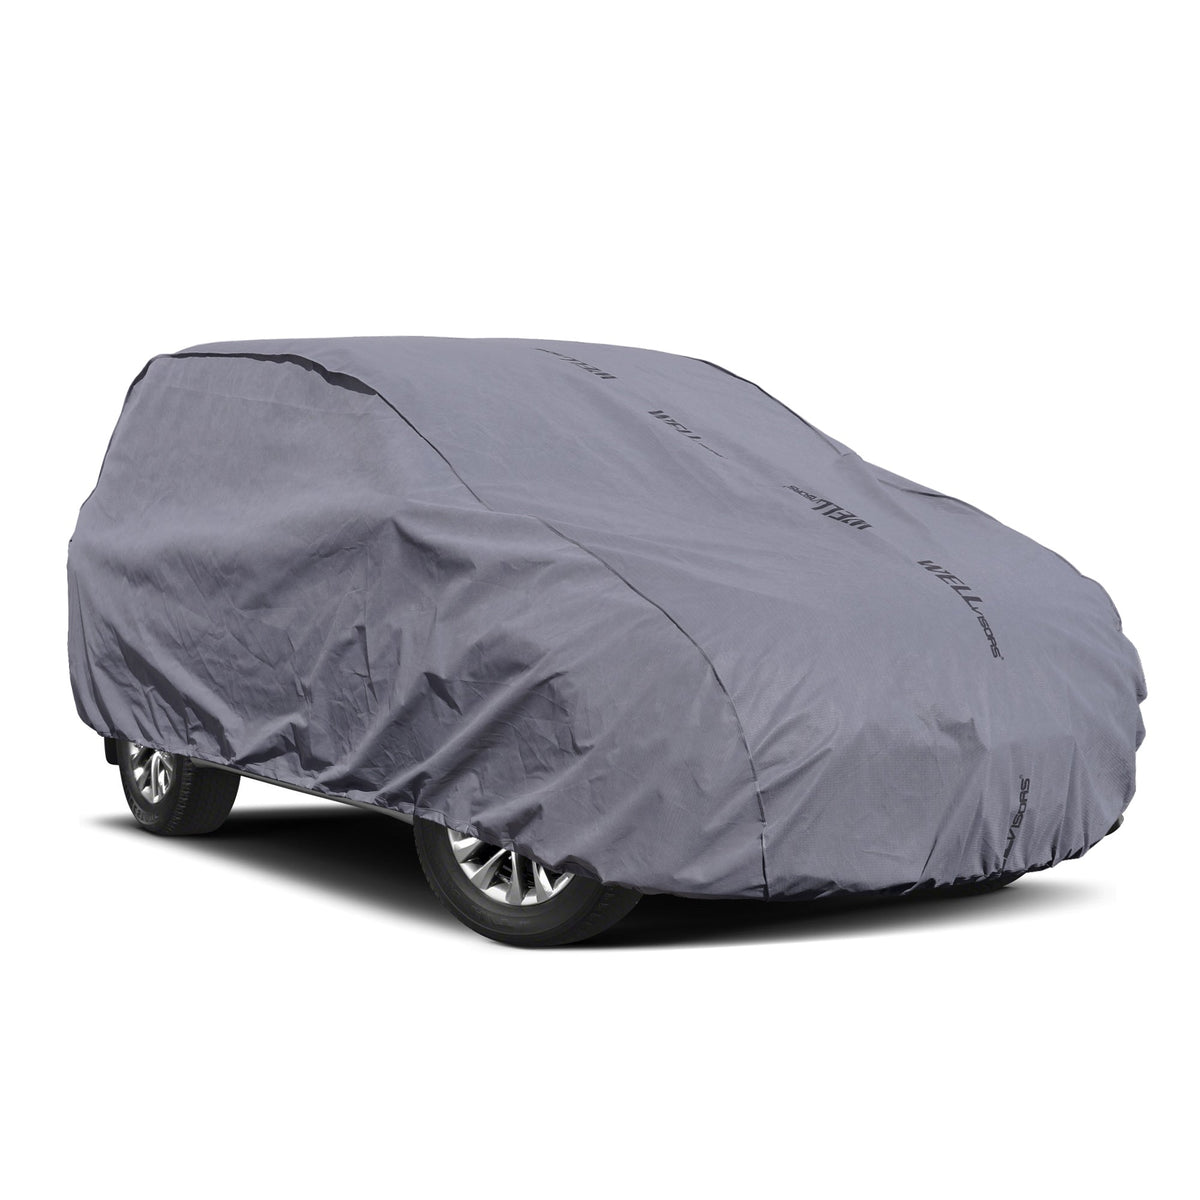 6 Layer Full Car Cover for Volkswagen VW T-Roc D11 R A11 Wagon SUV